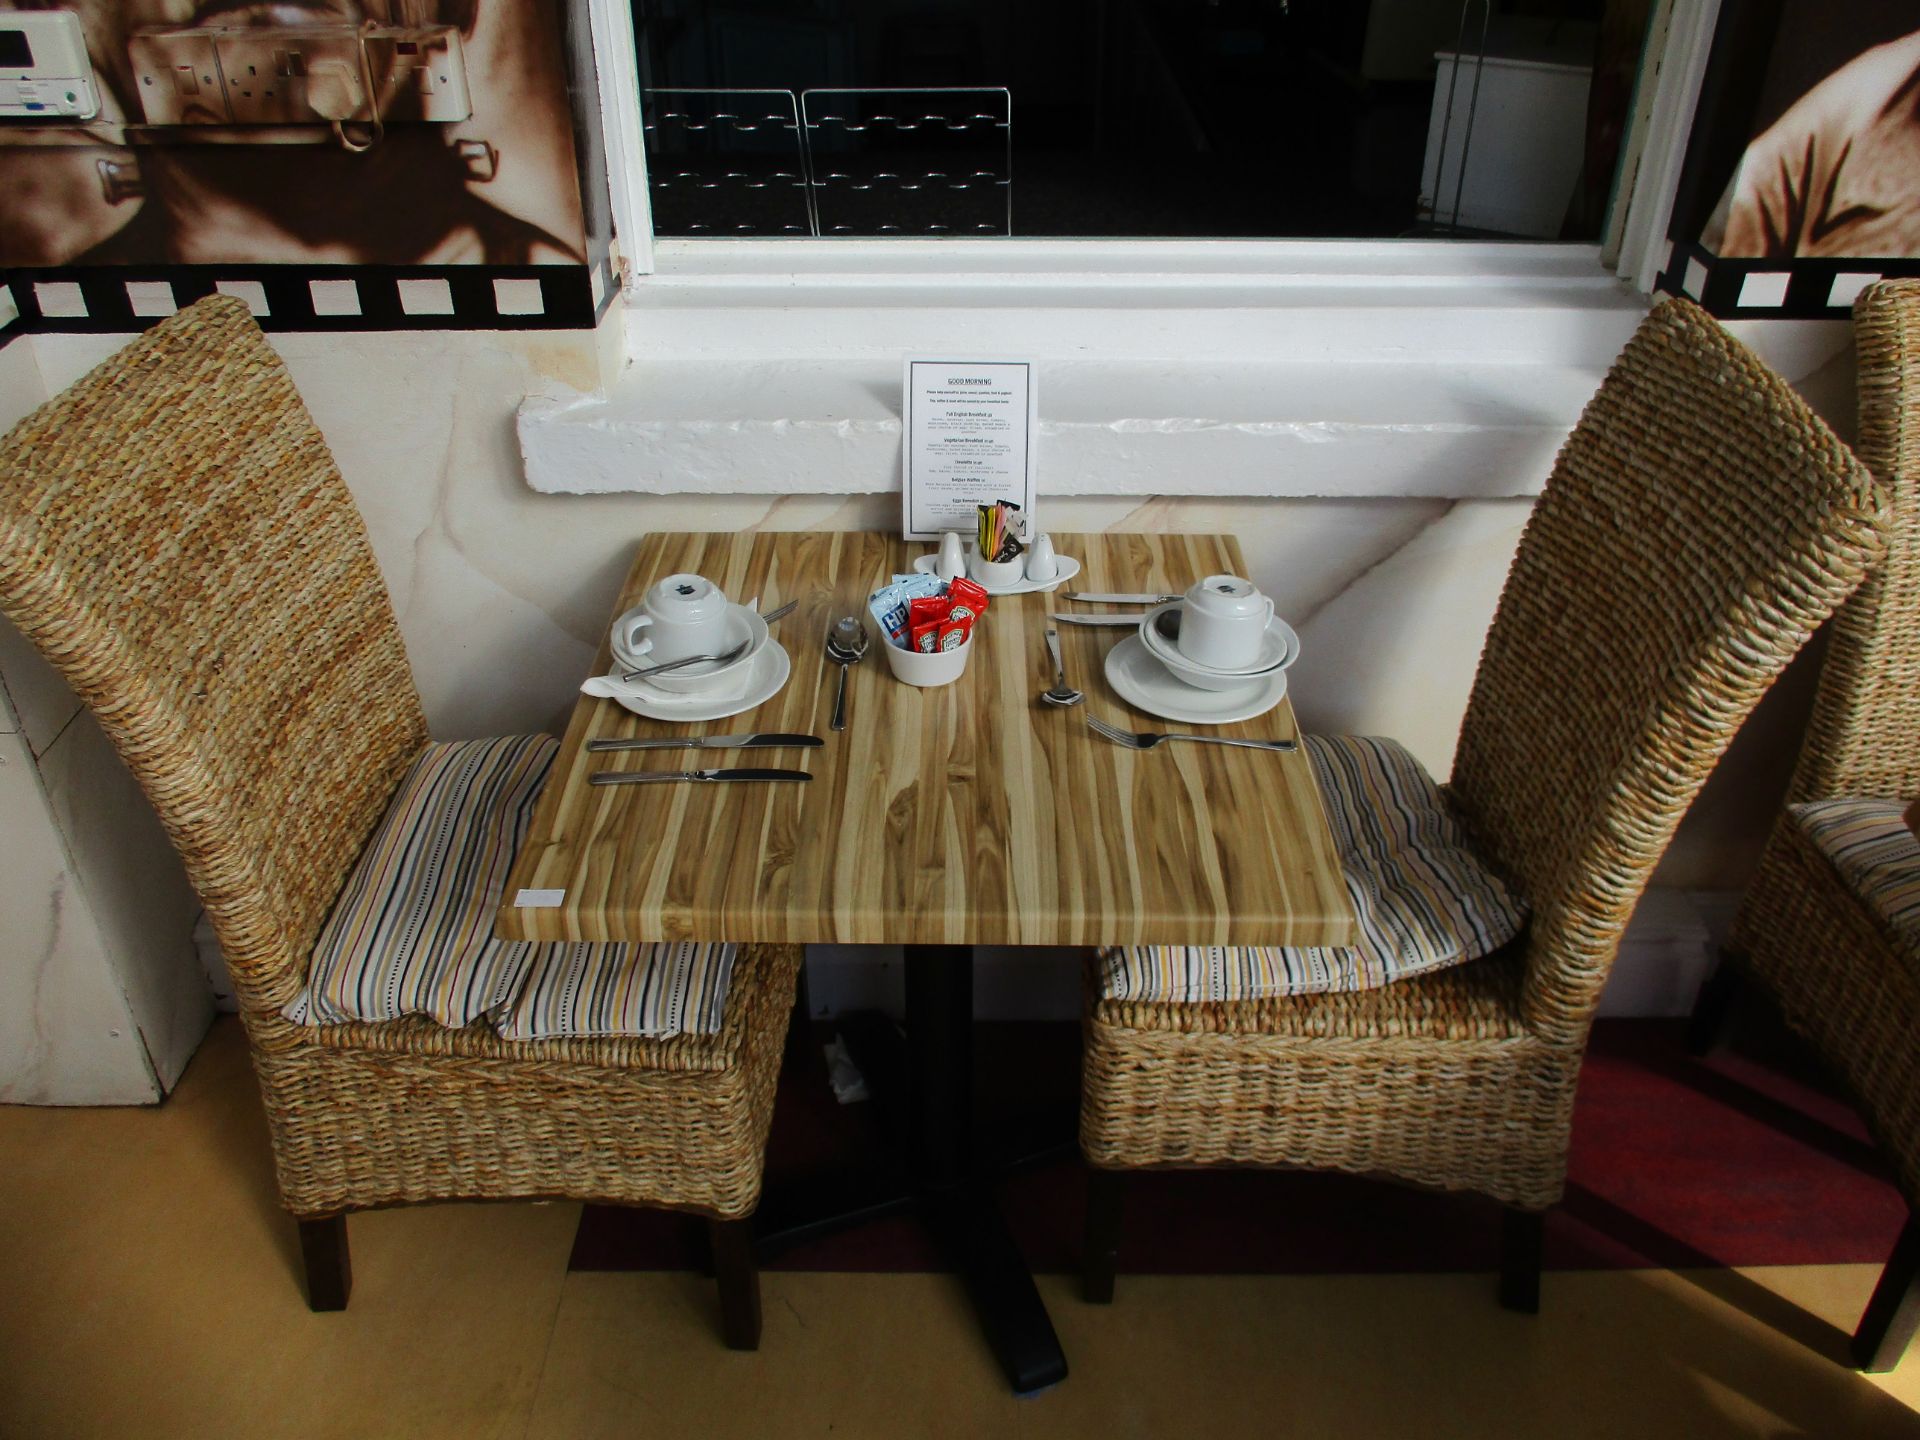 Wood effect laminated table 70cm x 70cm complete with 2 wicker chairs